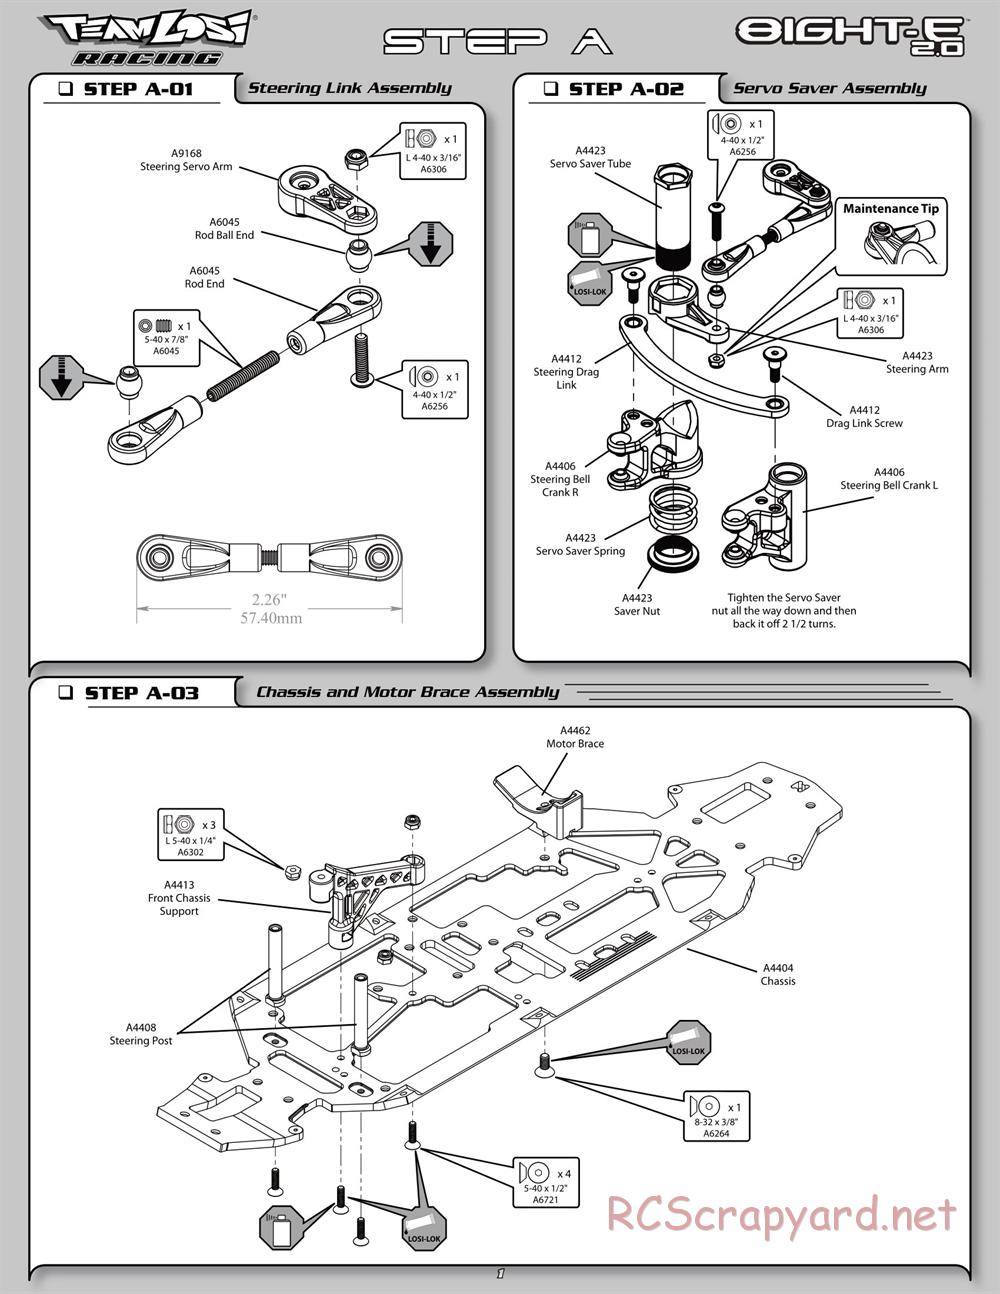 Team Losi - 8ight-E 2.0 Race Roller - Manual - Page 8